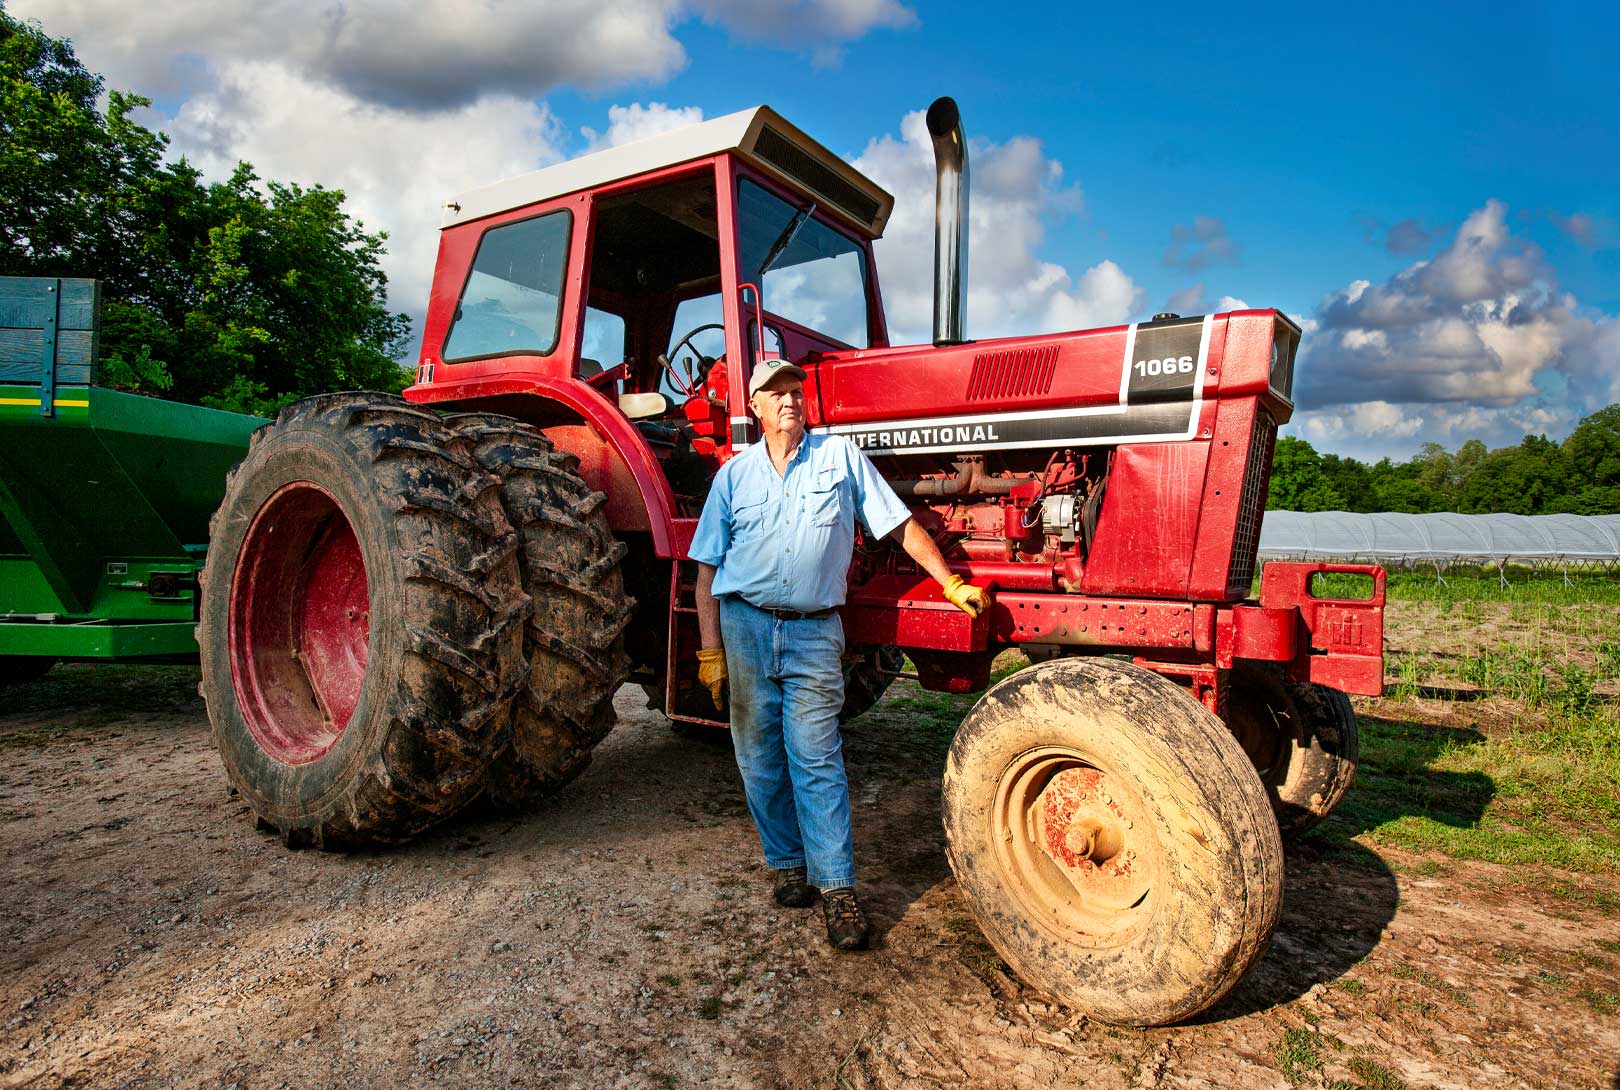 Hank Delvin Sr. standing next to his red International 1066 tractor on his farm